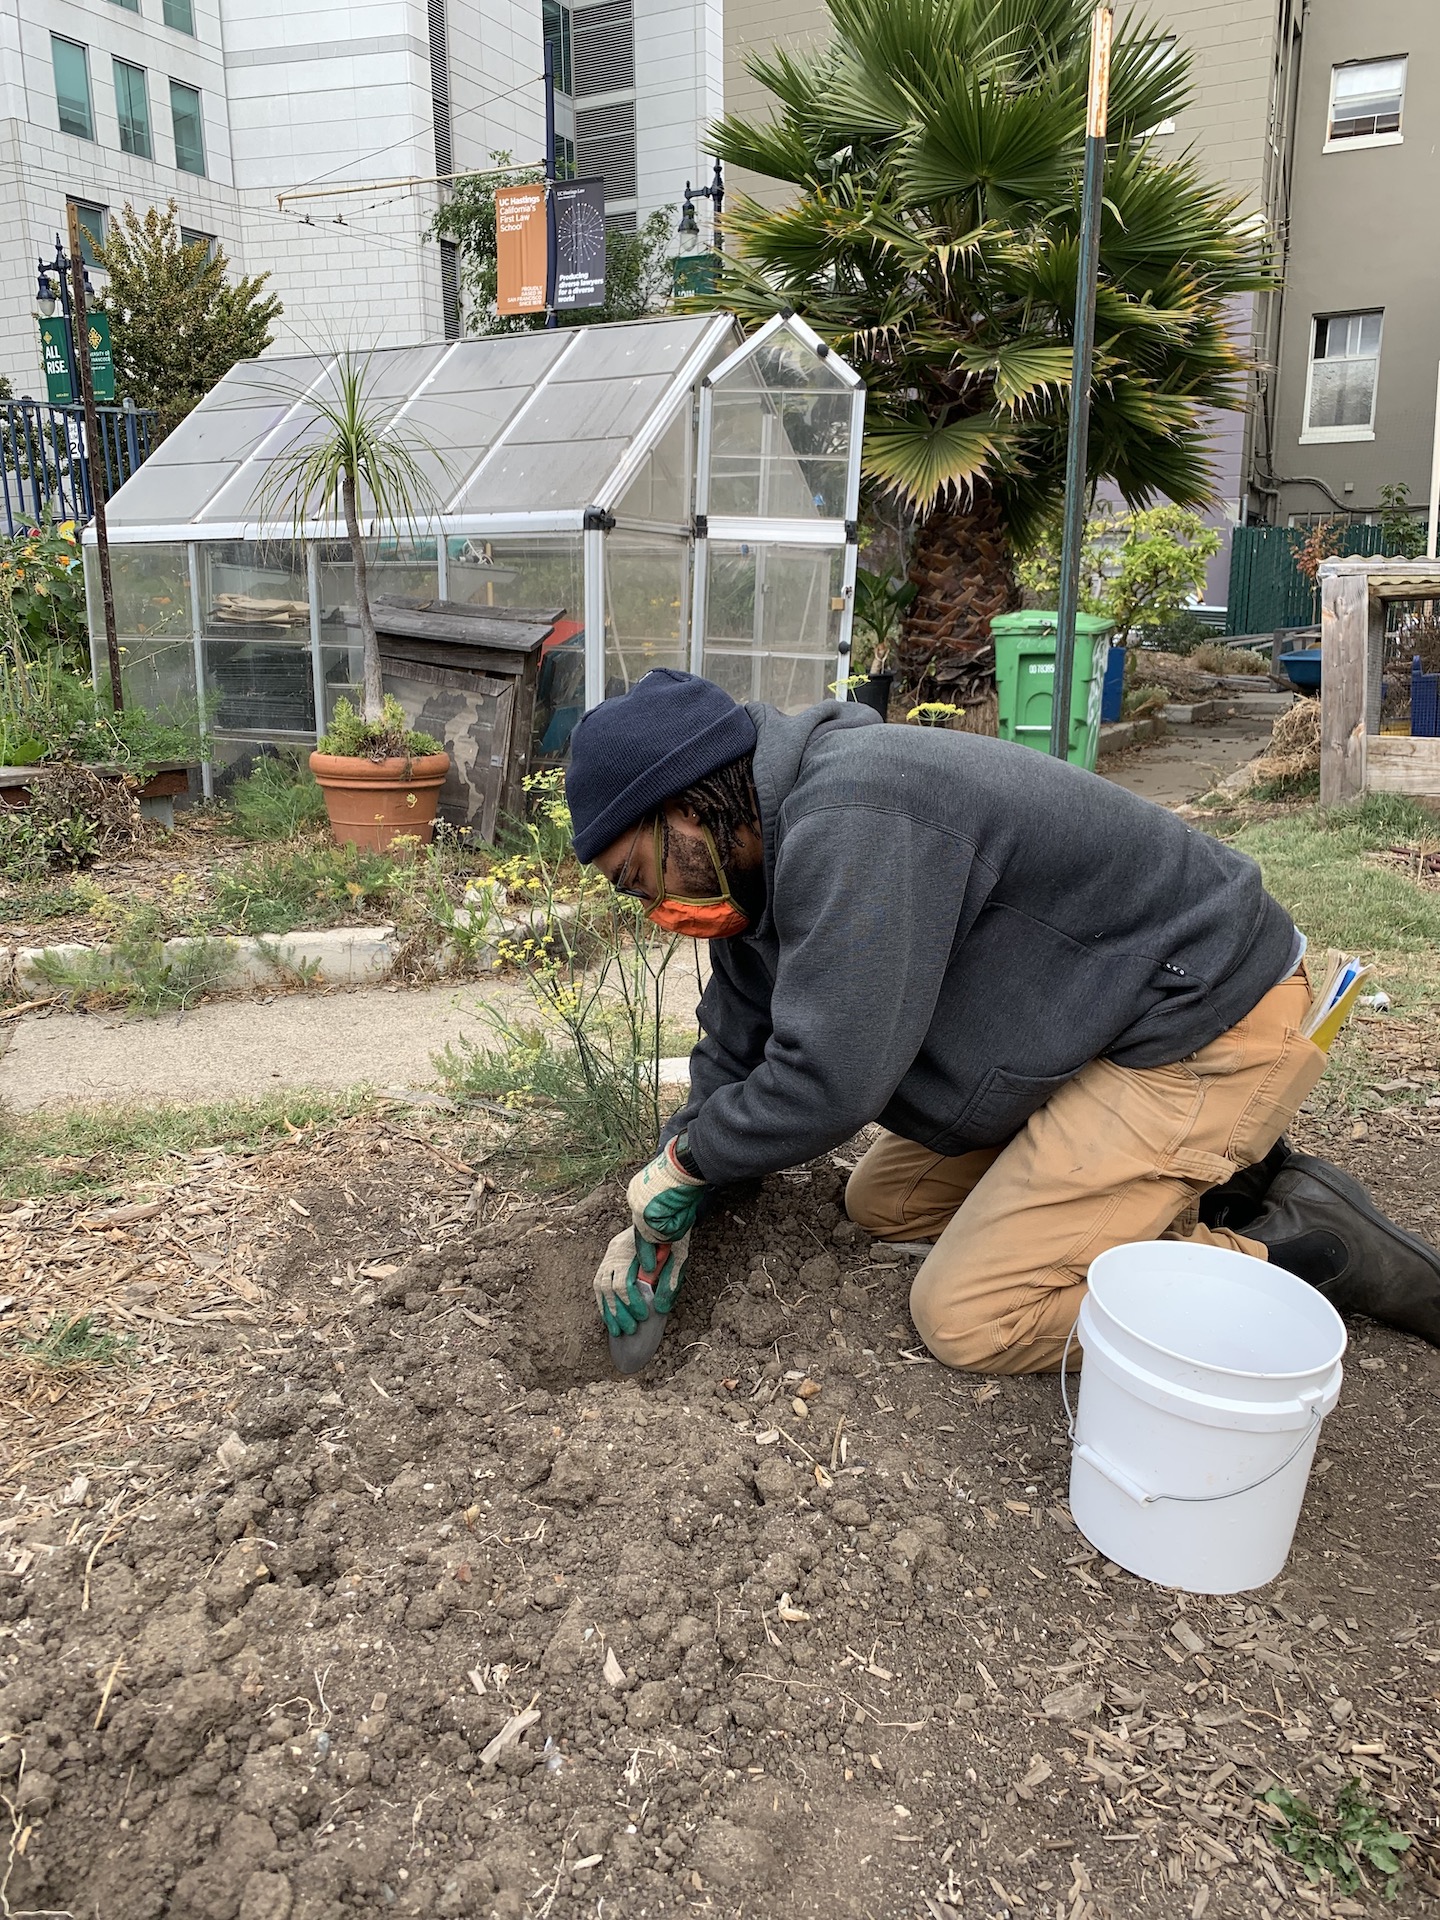 A black man in his 30's kneels in a patch of dirt, planting a small green plant. He wears orange pants and a grey sweatshirt. A bucket is beside him, and a greenhouse and palm tree are in the background. 